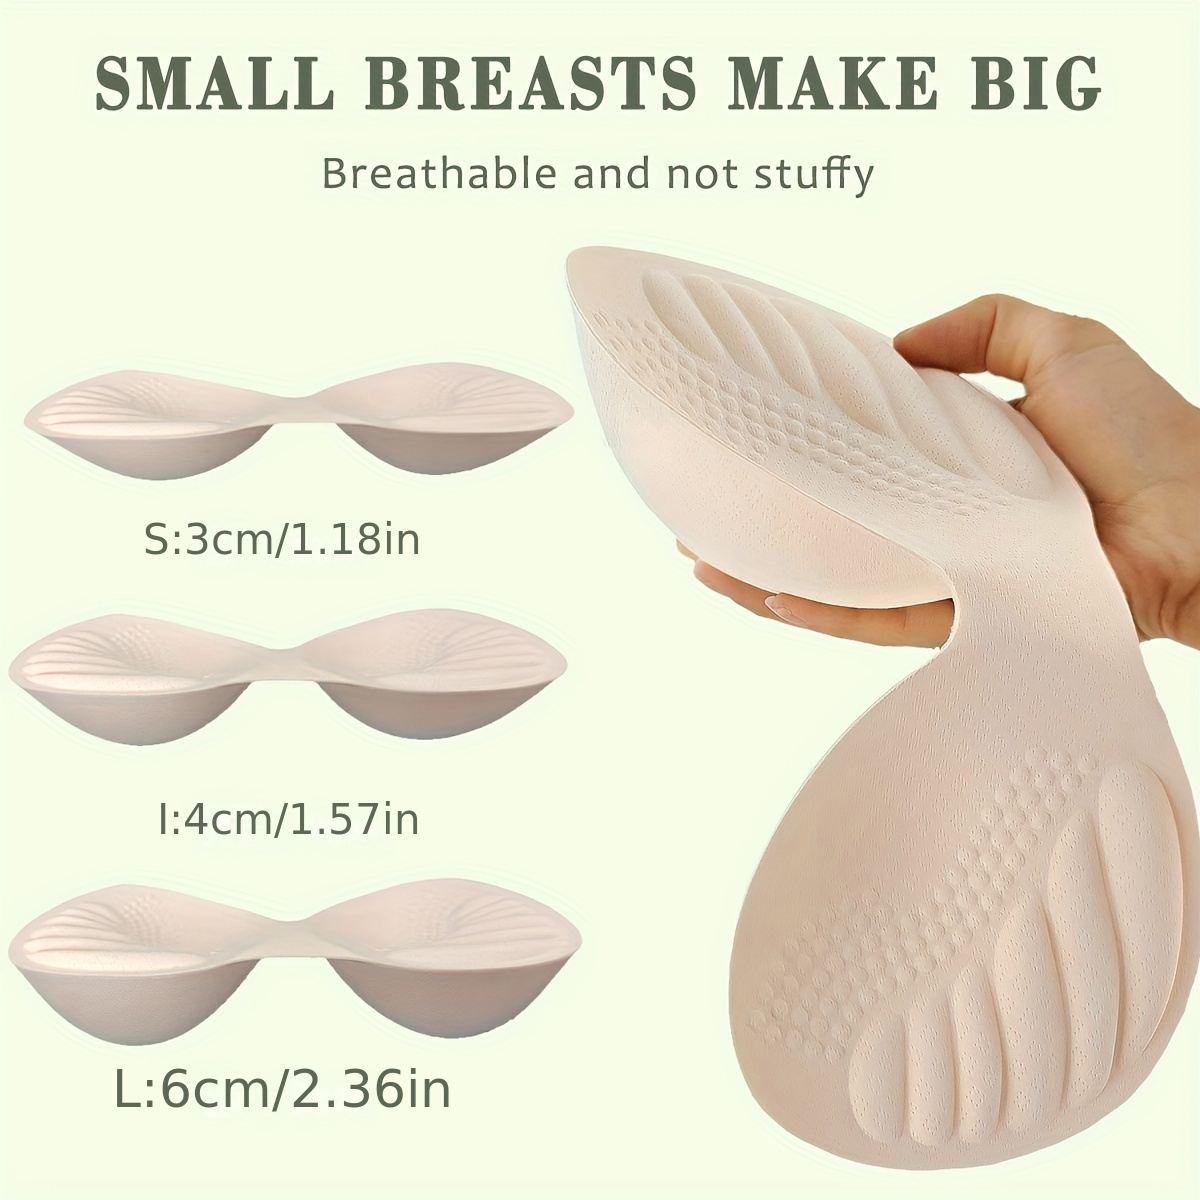 

1pc One-piece Solid Emulsion Reusable Bra Insert Pads, Invisible Removable Anti-convex Push Up Pads With 3 Thickness Options, Women's Lingerie & Underwear Accessories